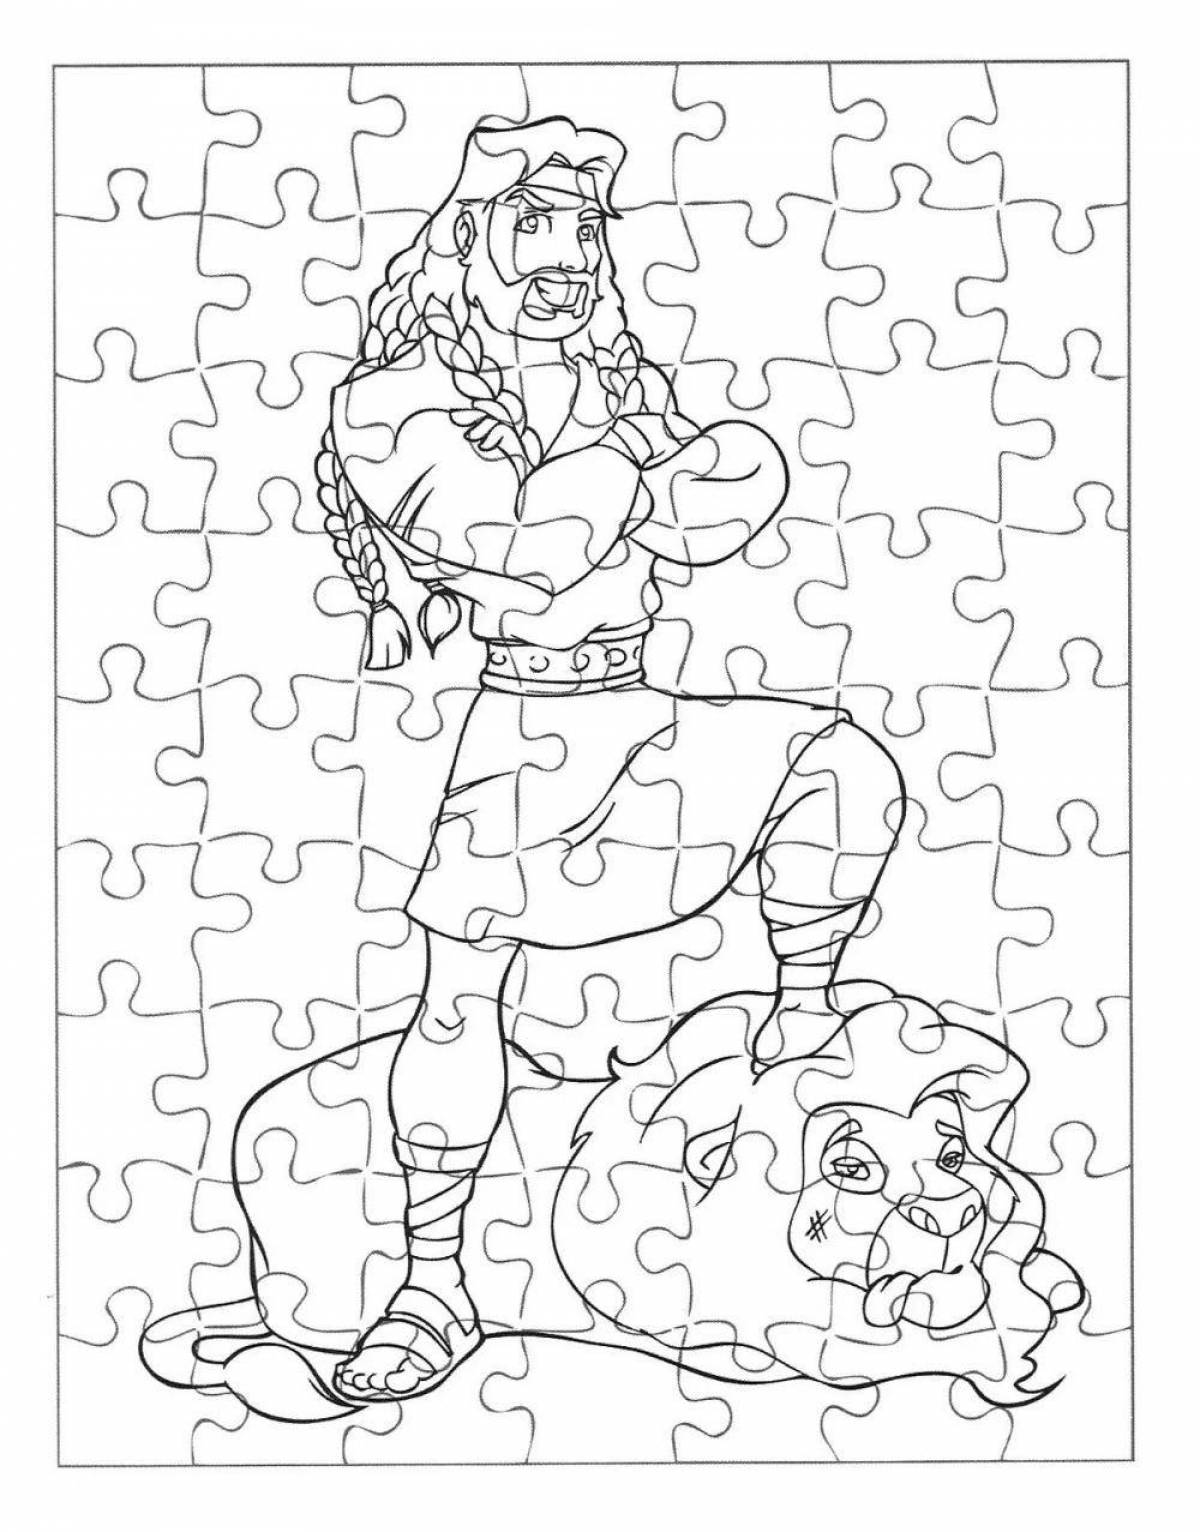 Coloring page of 12 labors of hercules